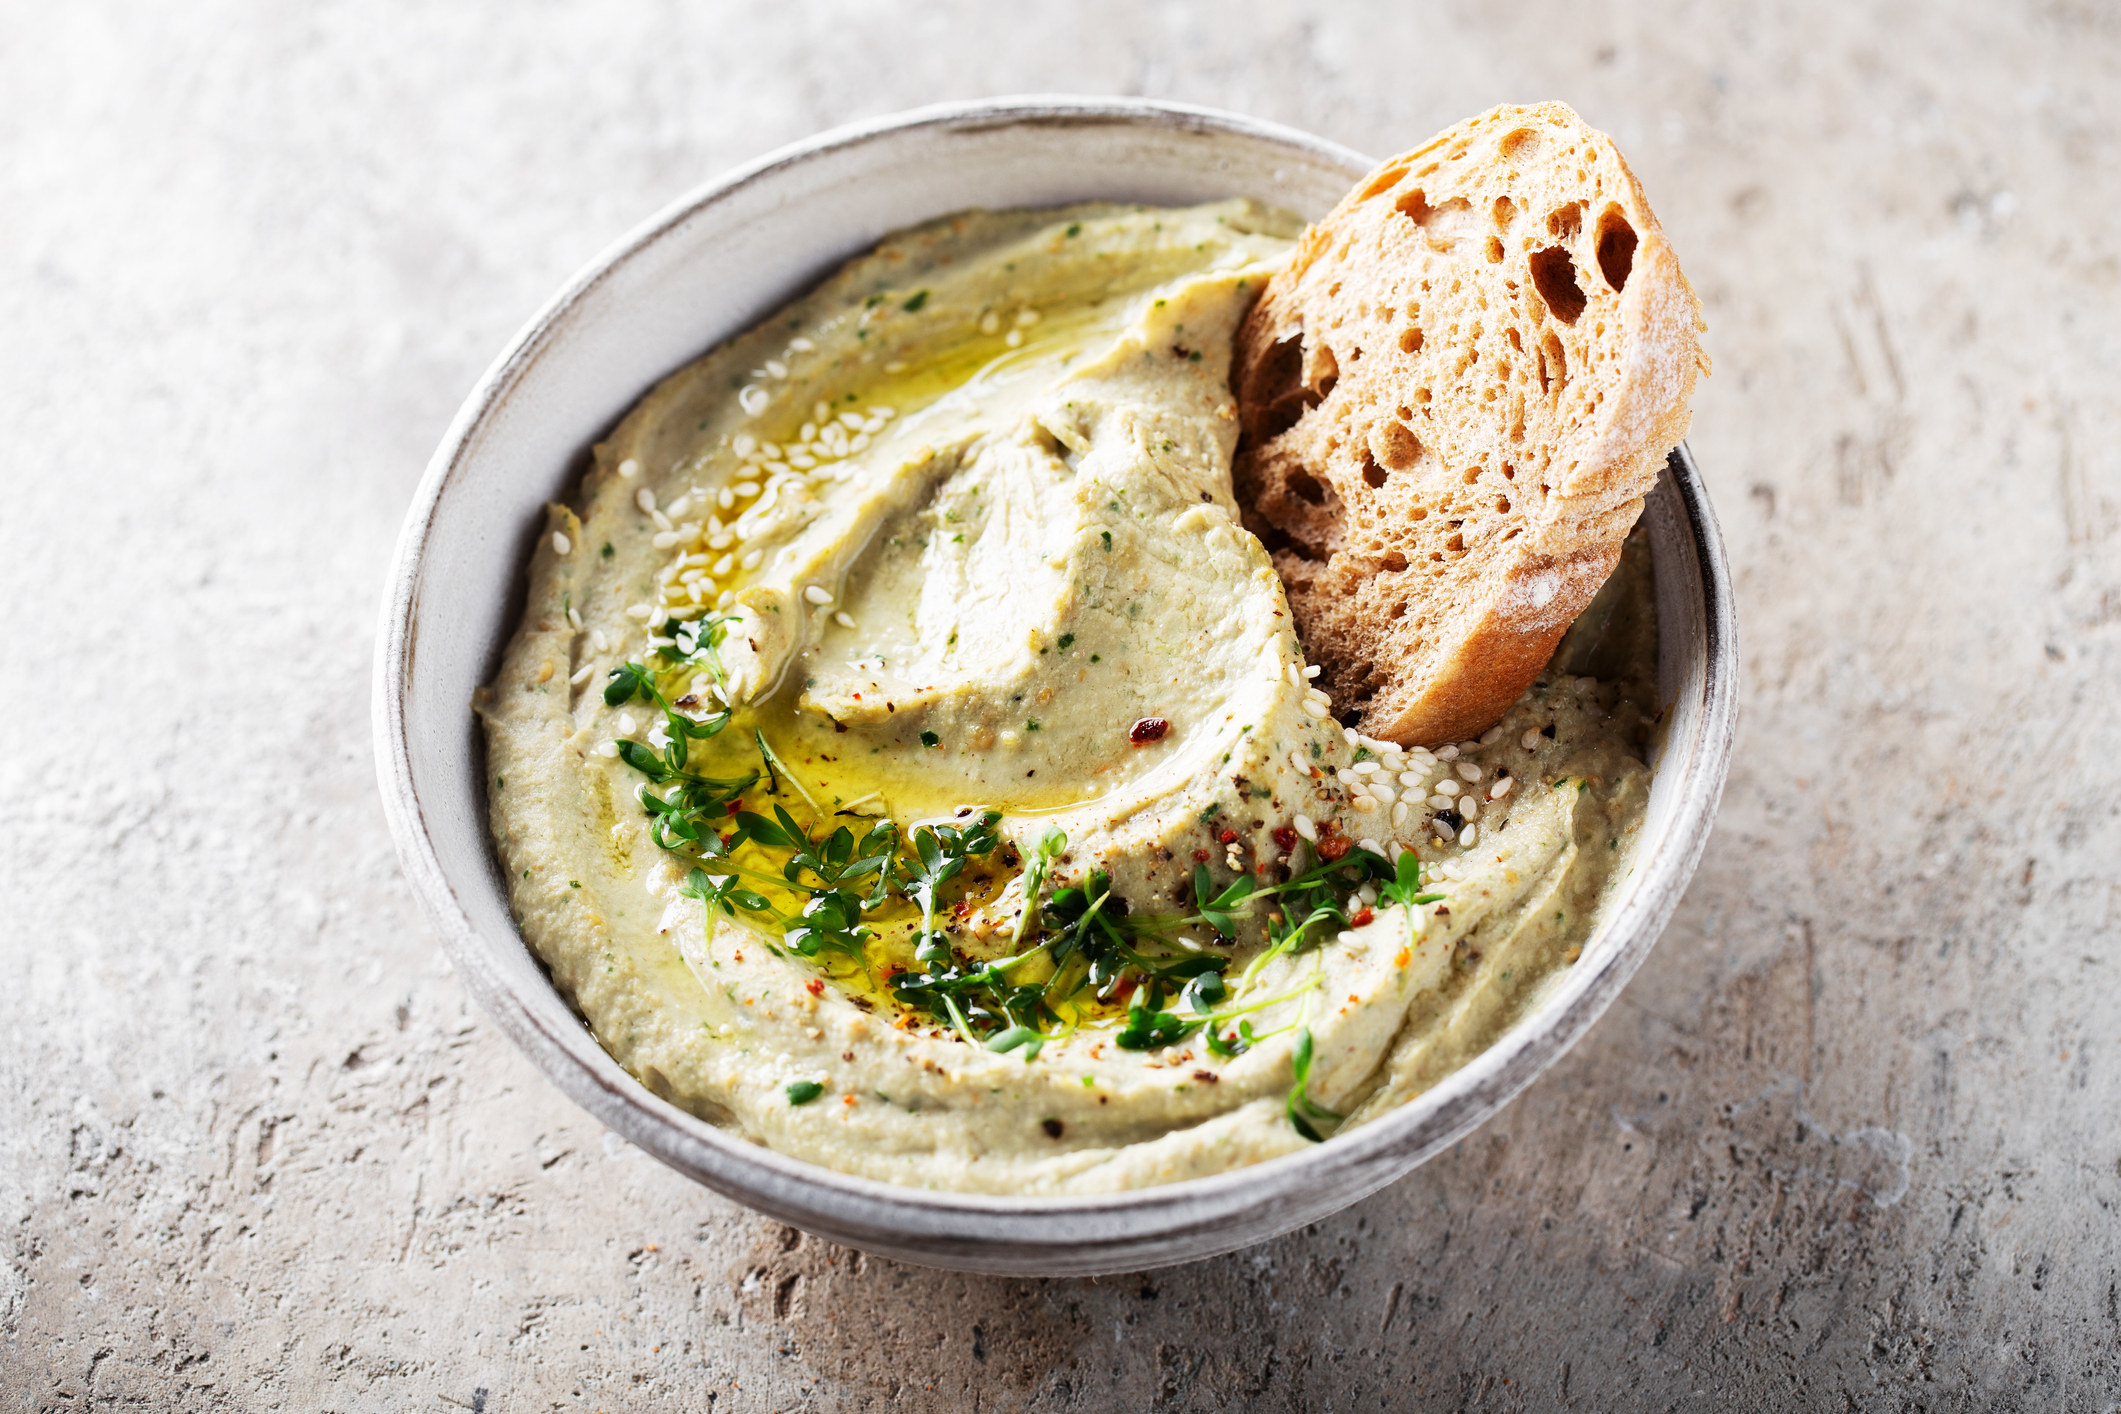 Roasted eggplant dip in a bowl with bread